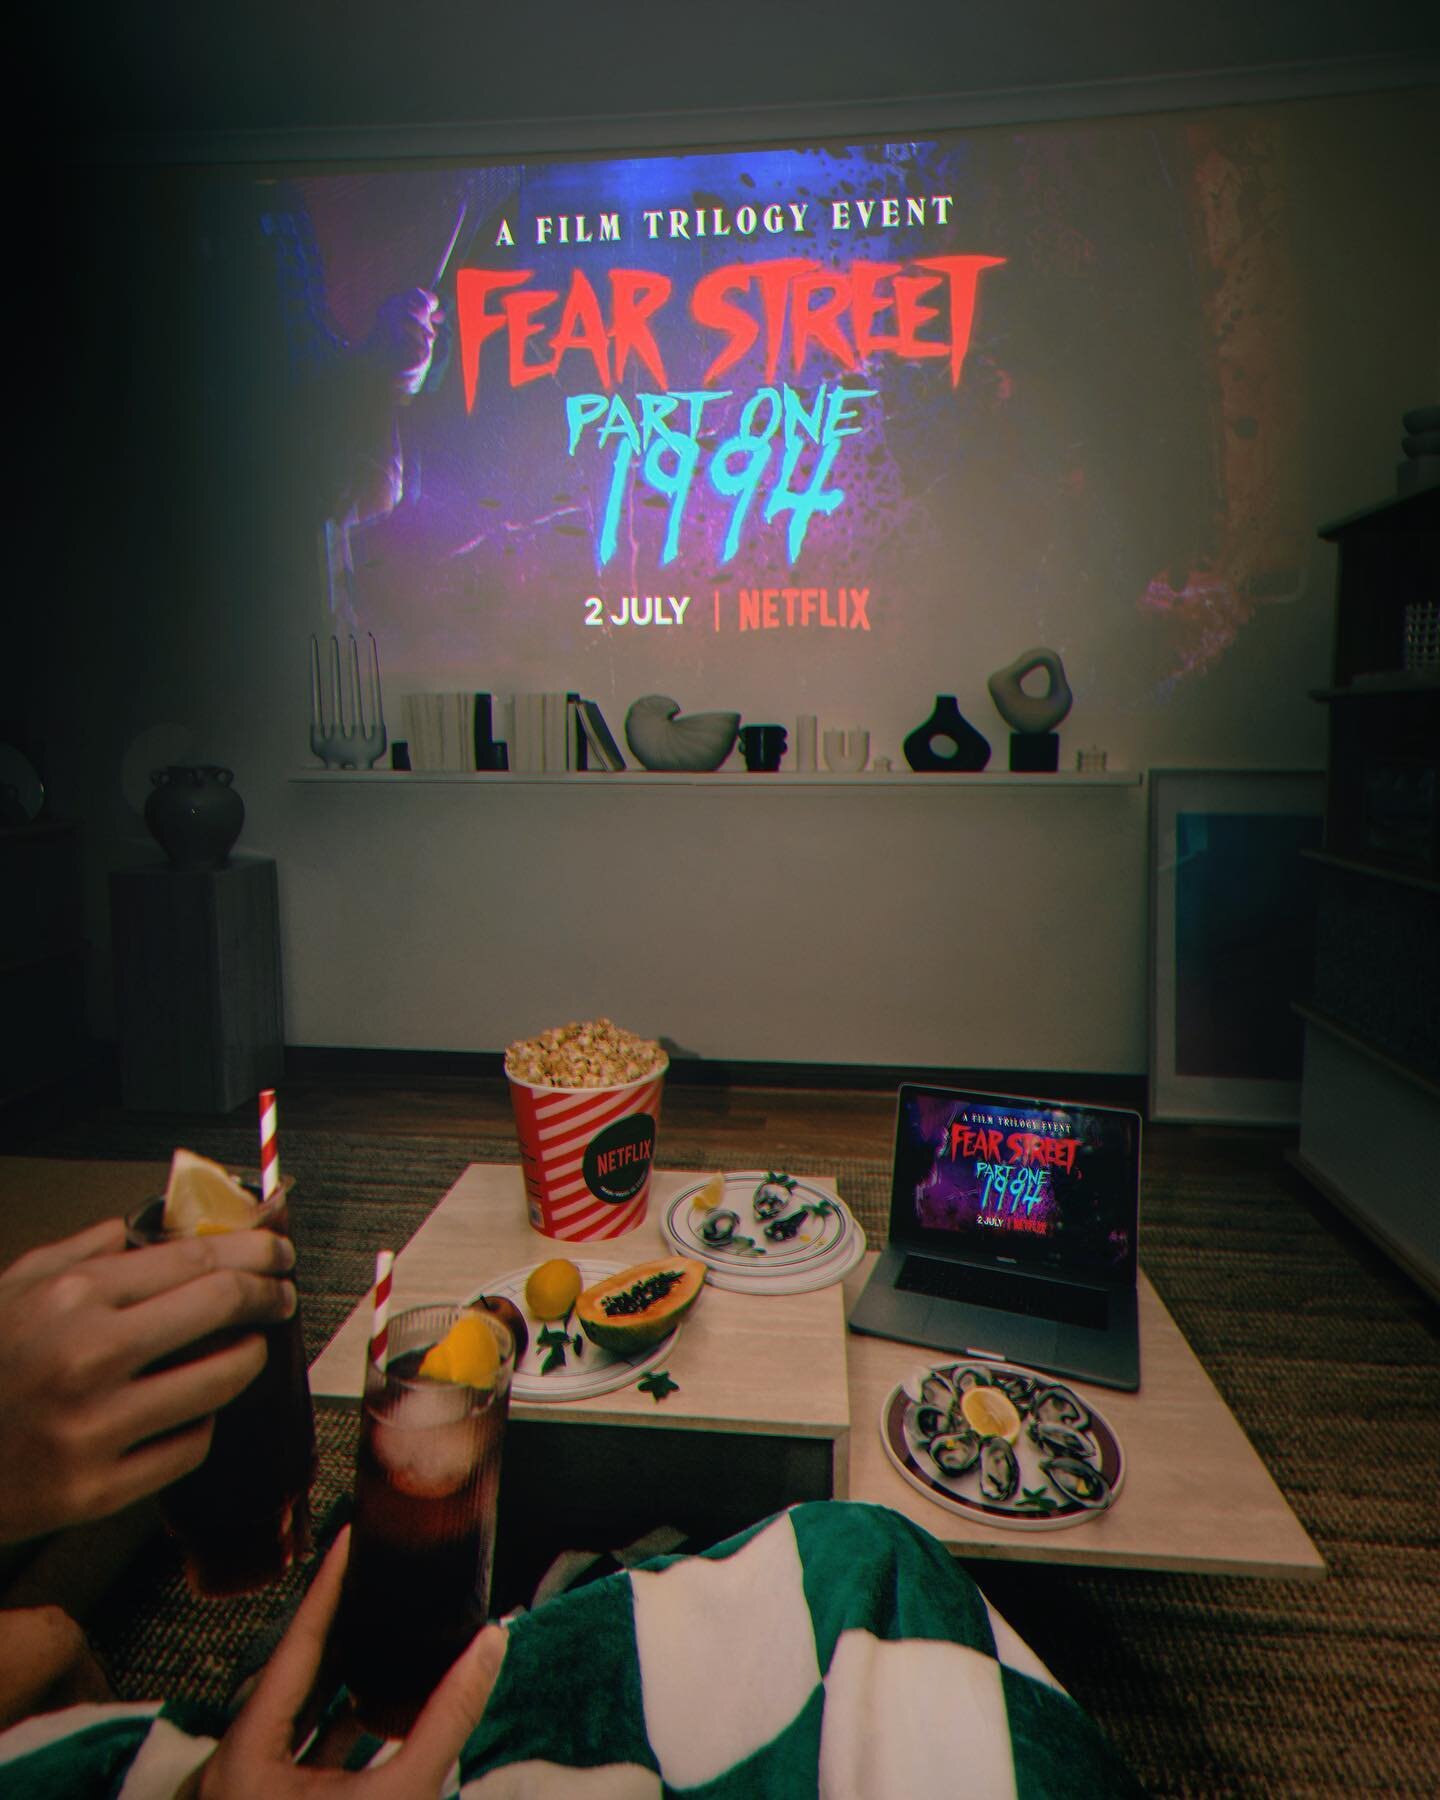 I've been obsessed with the #FearStreet trilogy on @NetflixANZ for the past 2 weeks 🔥🔪💀 Part 1 and Part 2 are amazing old school horror films. I&rsquo;ve been waiting for the come back of this genre and OMG I can&rsquo;t wait to watch Part 3 1666,